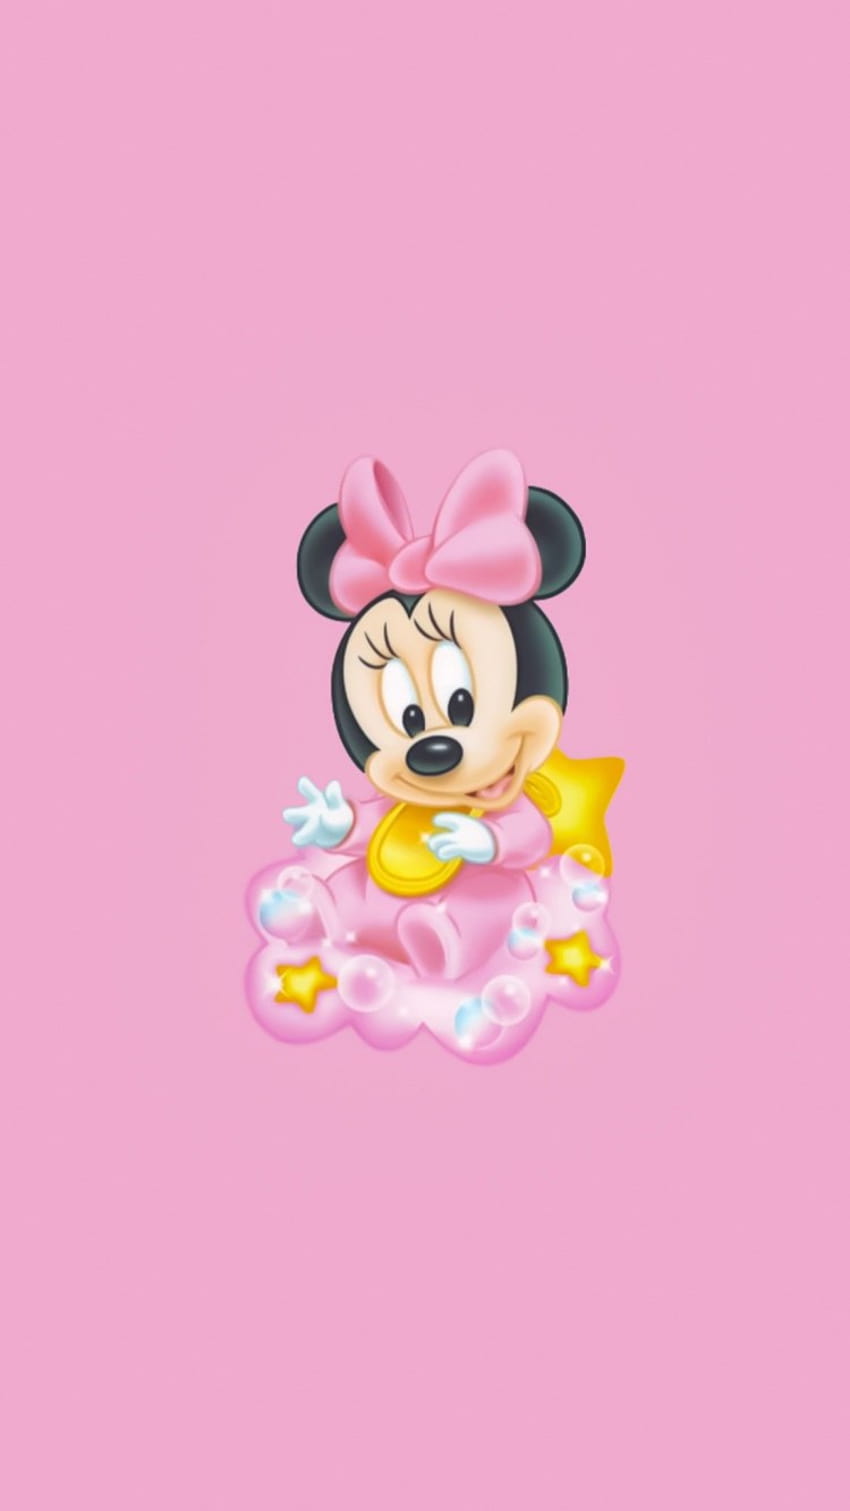 30 Mickey Mouse Disney Aesthetic : Baby Minnie Mouse on Yellow Chair, ミニー ディズニー iphone HD電話の壁紙